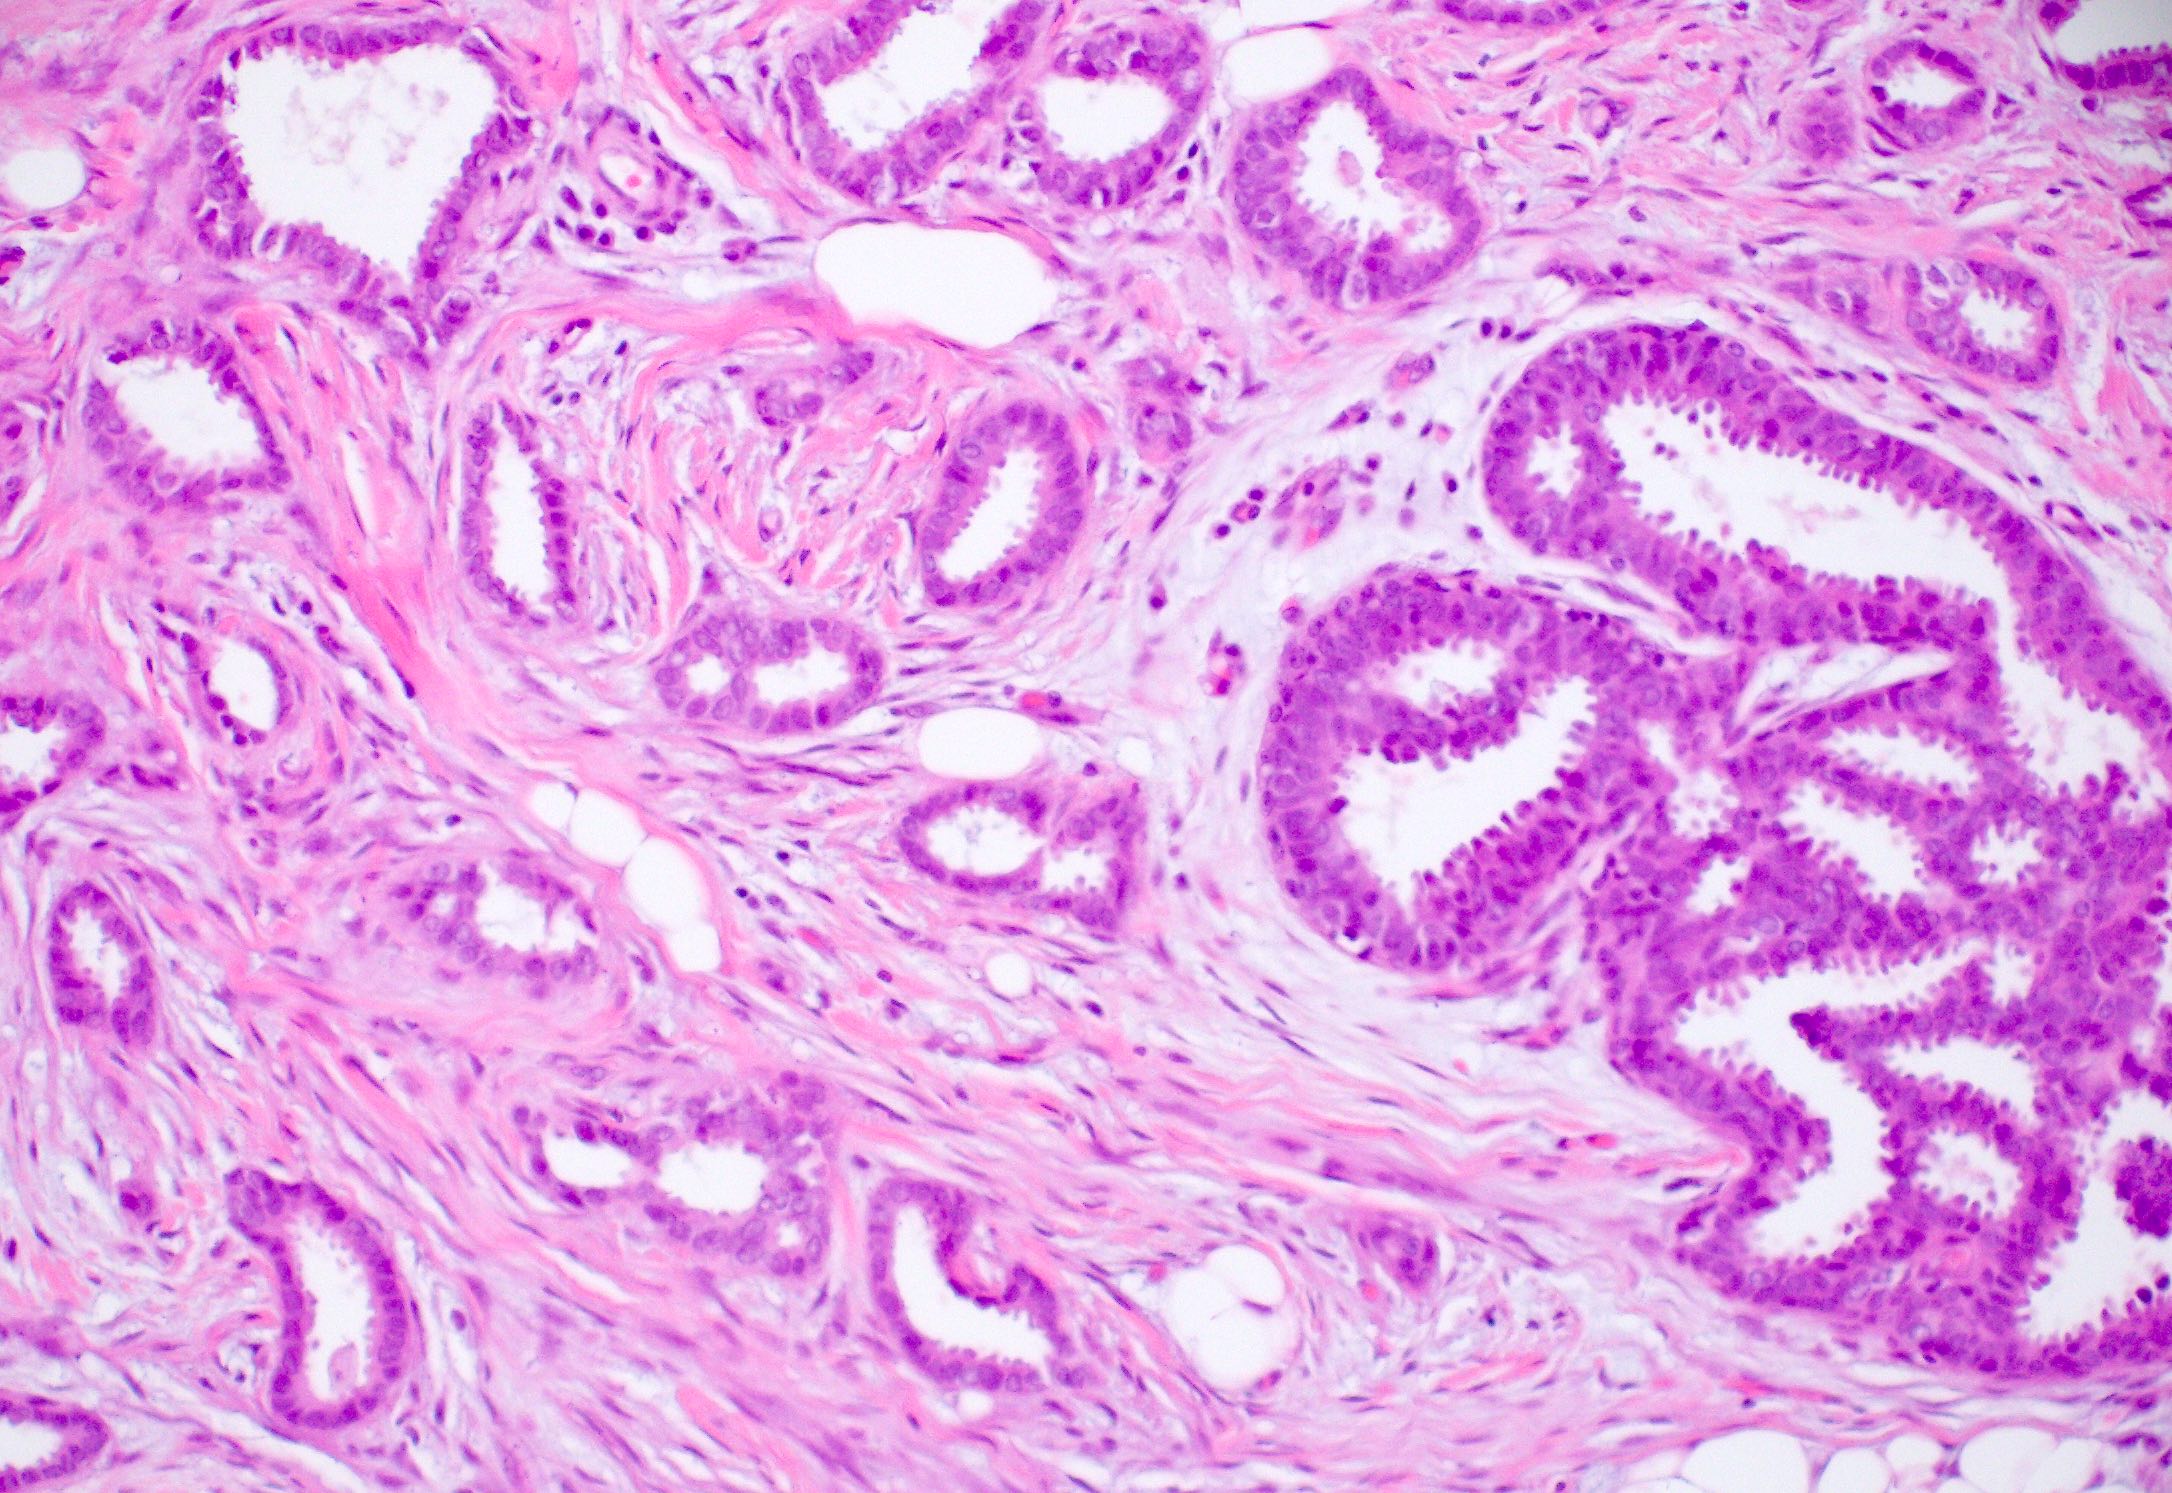 Associated atypical ductal hyperplasia / flat epithelial atypia